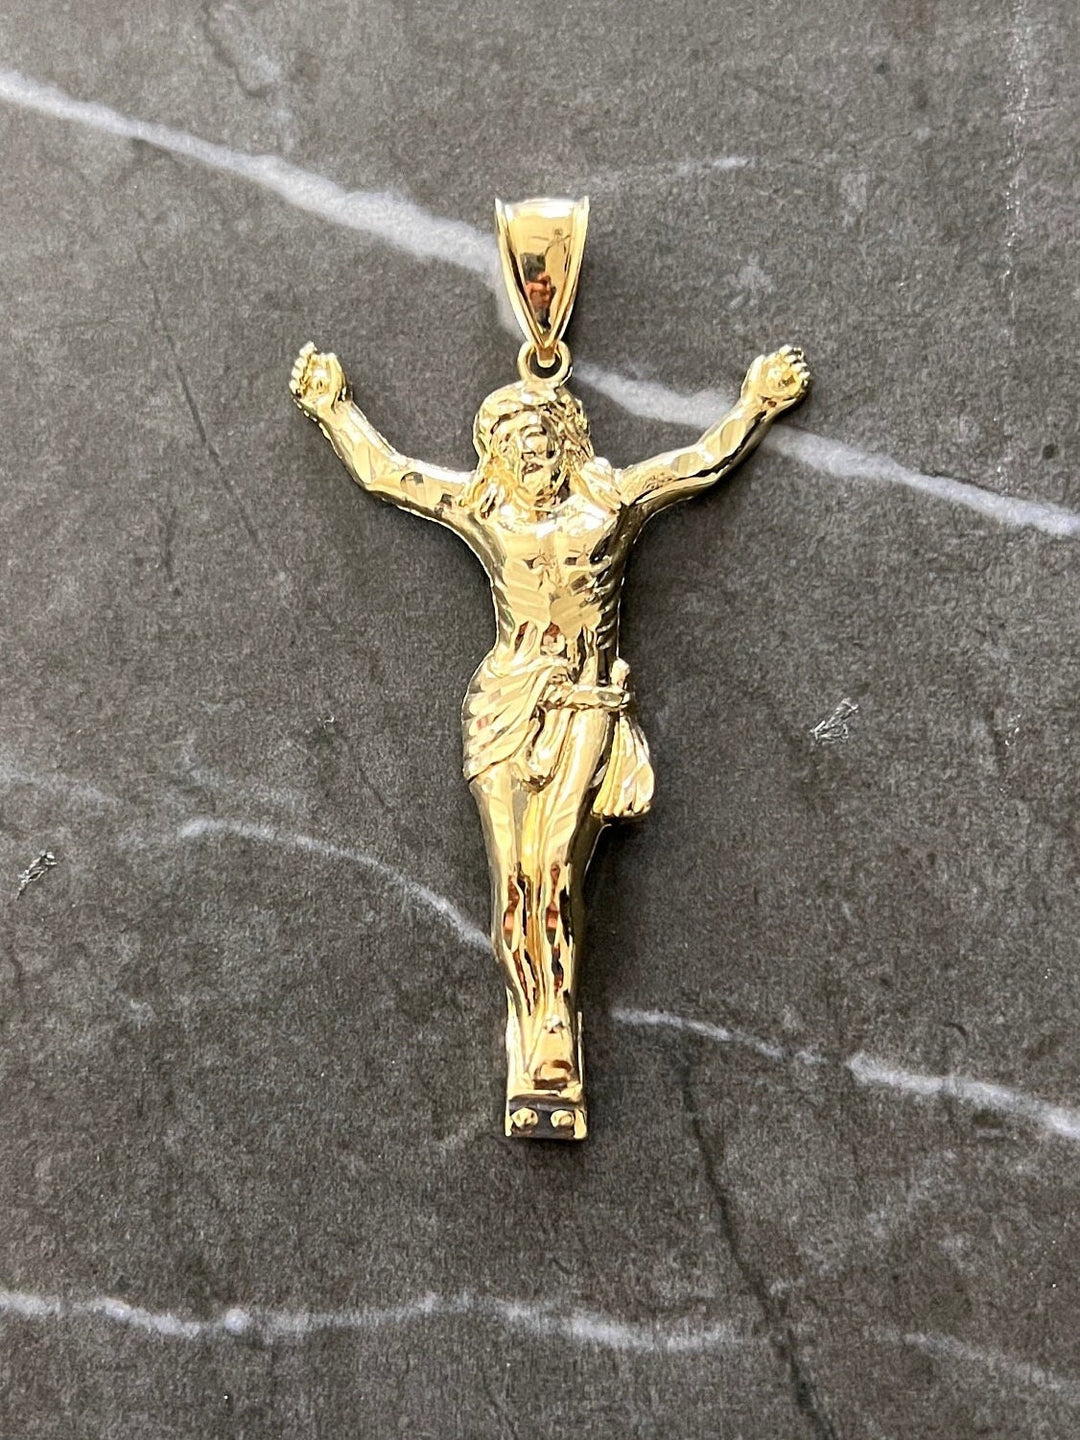 Authentic 10K Solid Gold Diamond Cut Textured, Full Body Jesus Crucifix Yellow Gold Charm/Pendant, The Face/Body of Jesus Religious 10K Gold